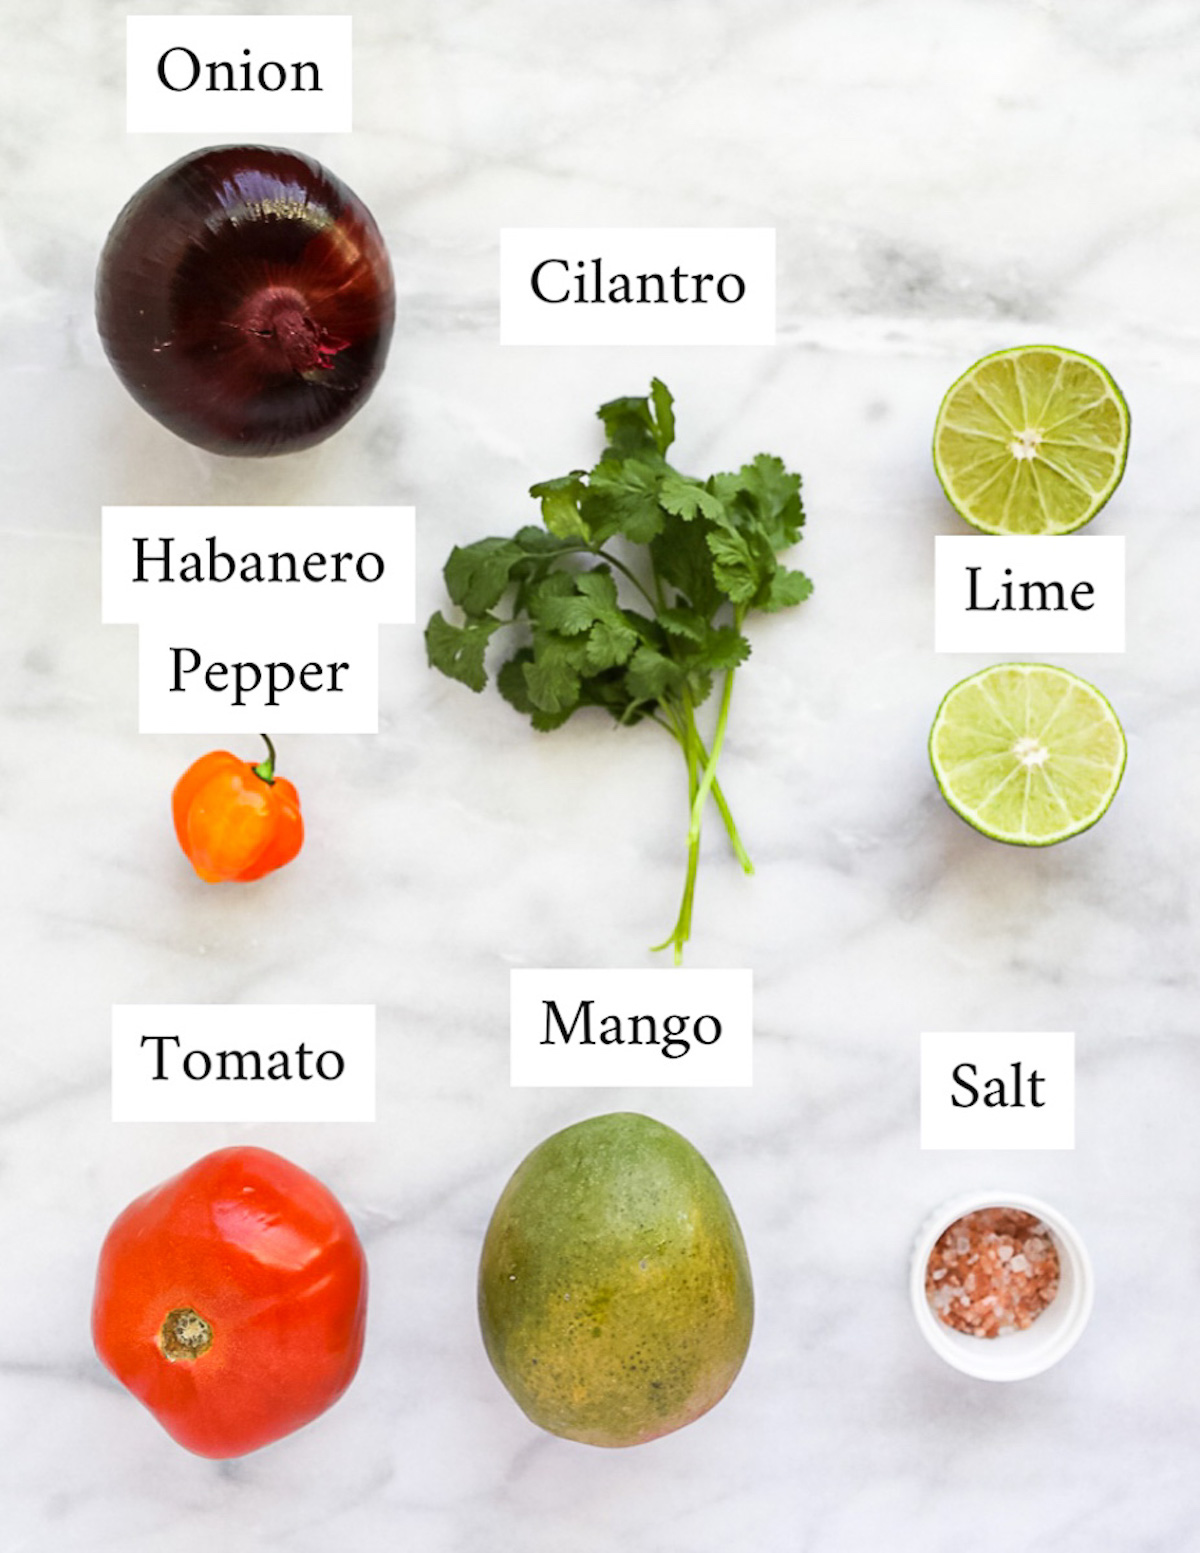 Labeled ingredients including: onion, cilantro, lime, habanero pepper, tomato, mango, and salt.